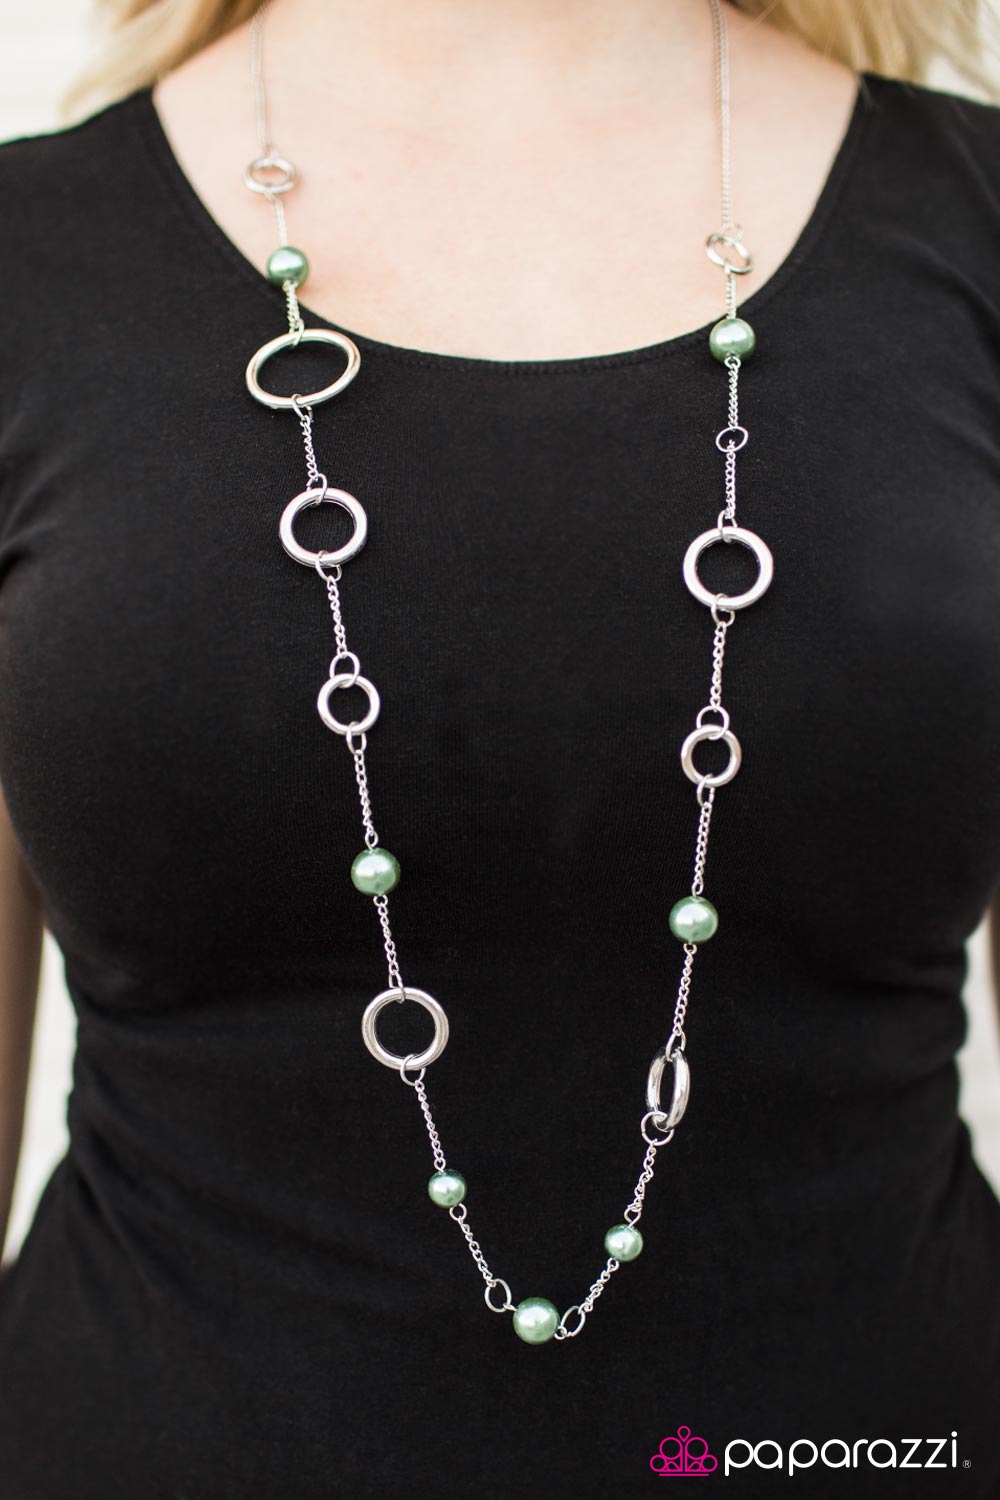 Ring My Bell - Green - Paparazzi necklace